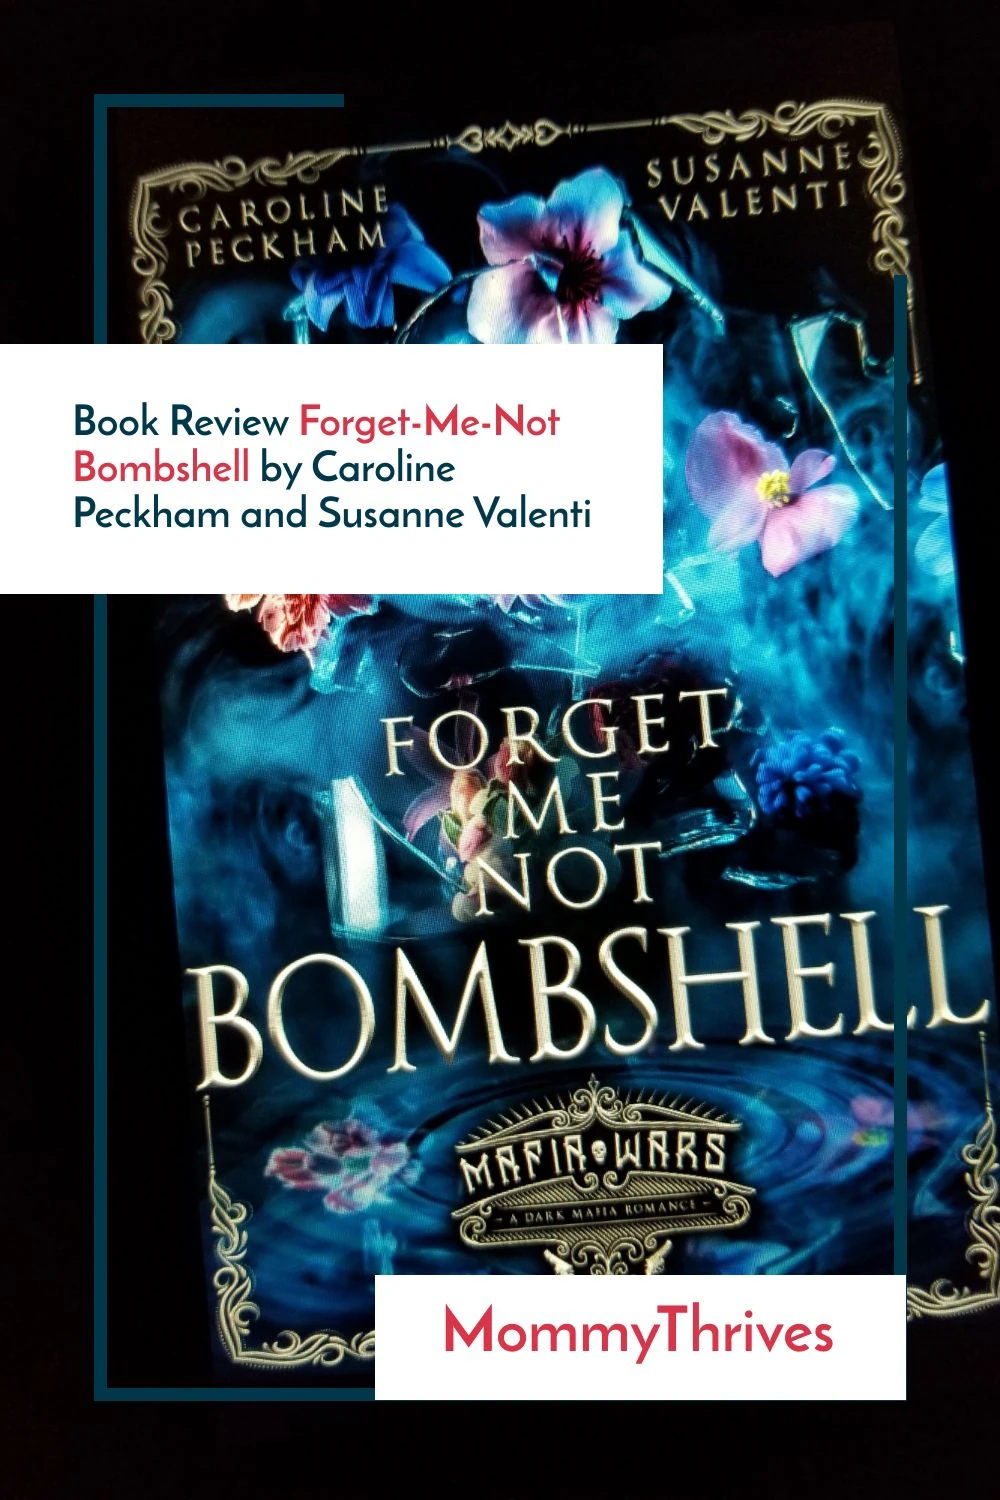 Reverse Harem Dark Romance Book Review - Book Review Forget Me Not Bombshell - Mafia Wars Series Book Review